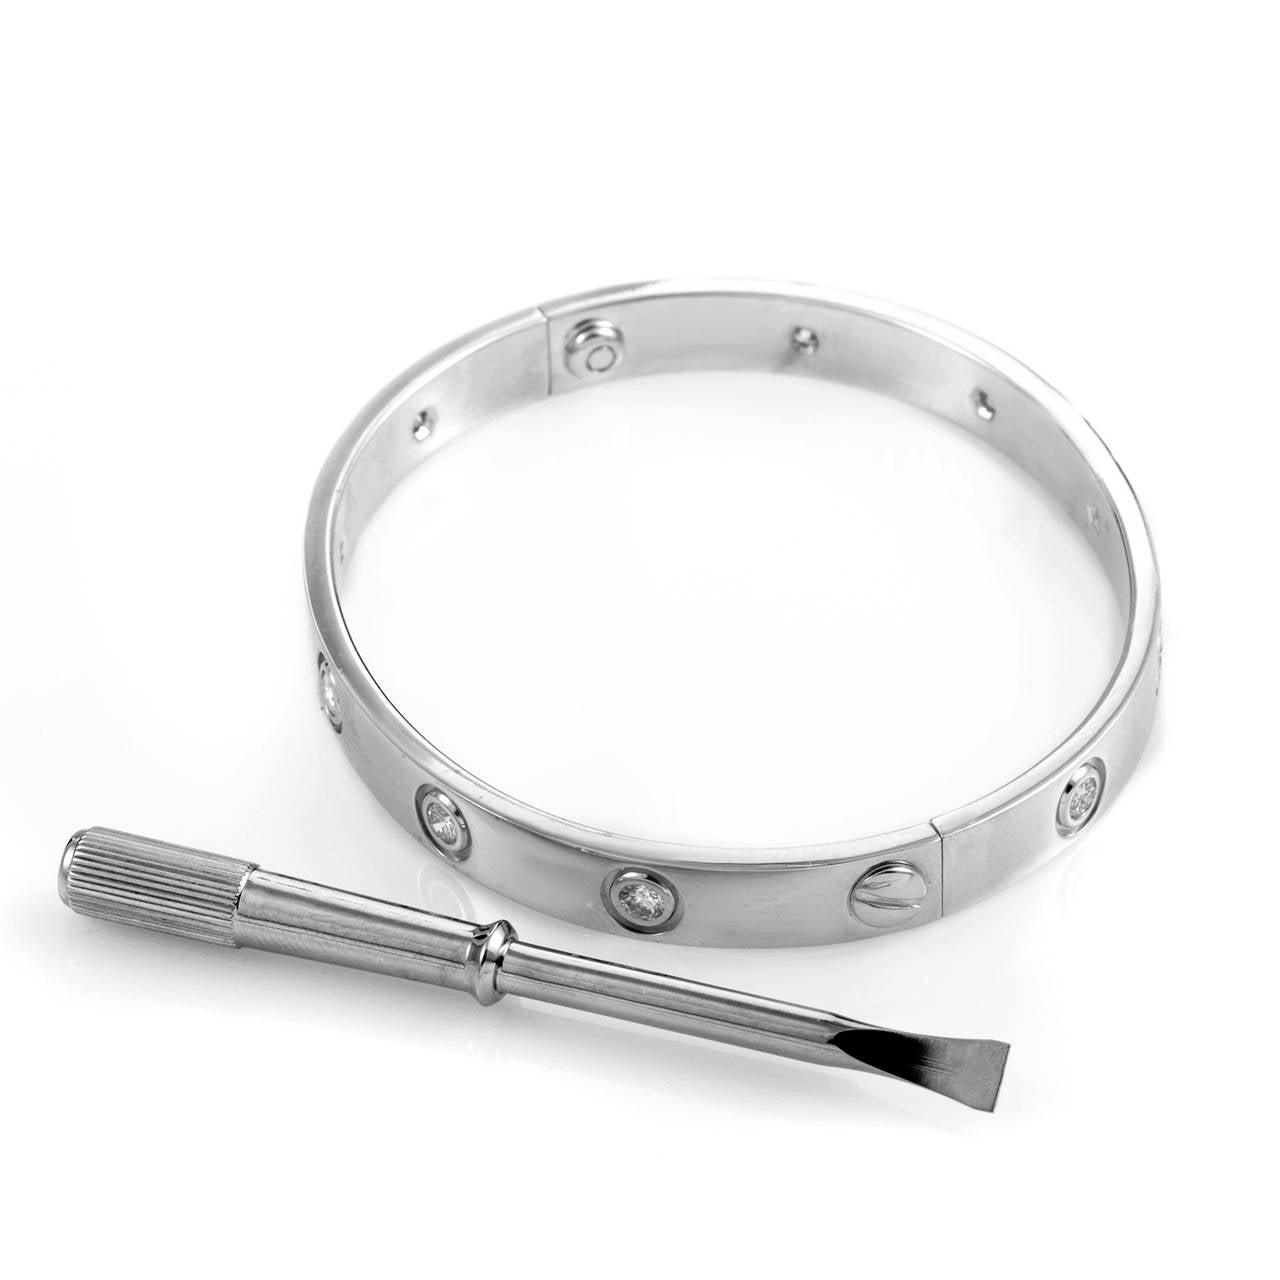 The LOVE collection from Cartier is world-renowned for its exceptional array of jewelry and this design may be one of the collection's most exceptional. This bracelet is made of 18K white gold and in place of the collection's signature screw-shaped